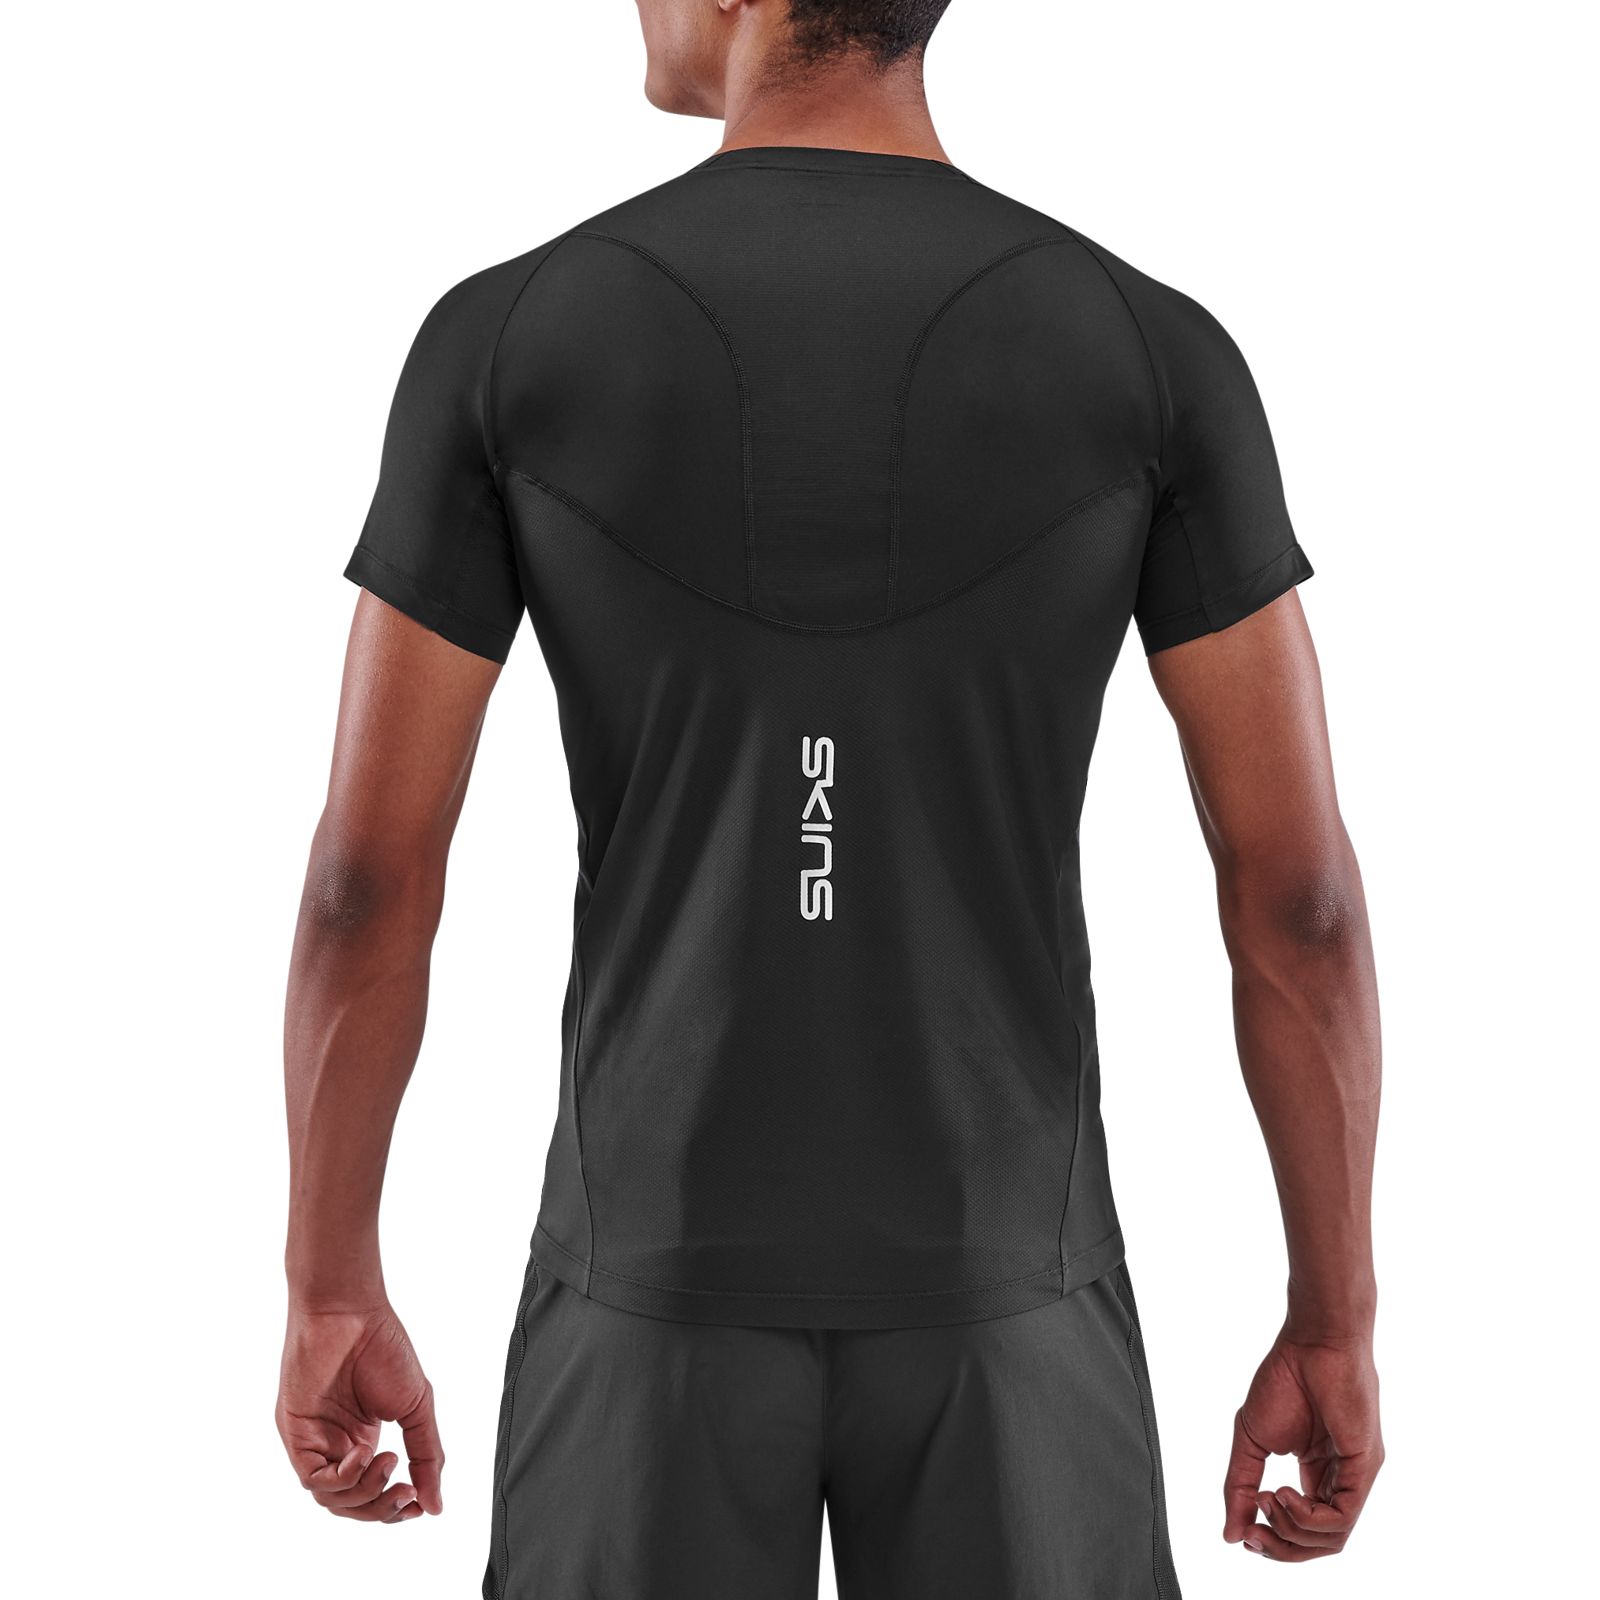 BIONIC Compression Shirt - Short Sleeve - Black with Gray